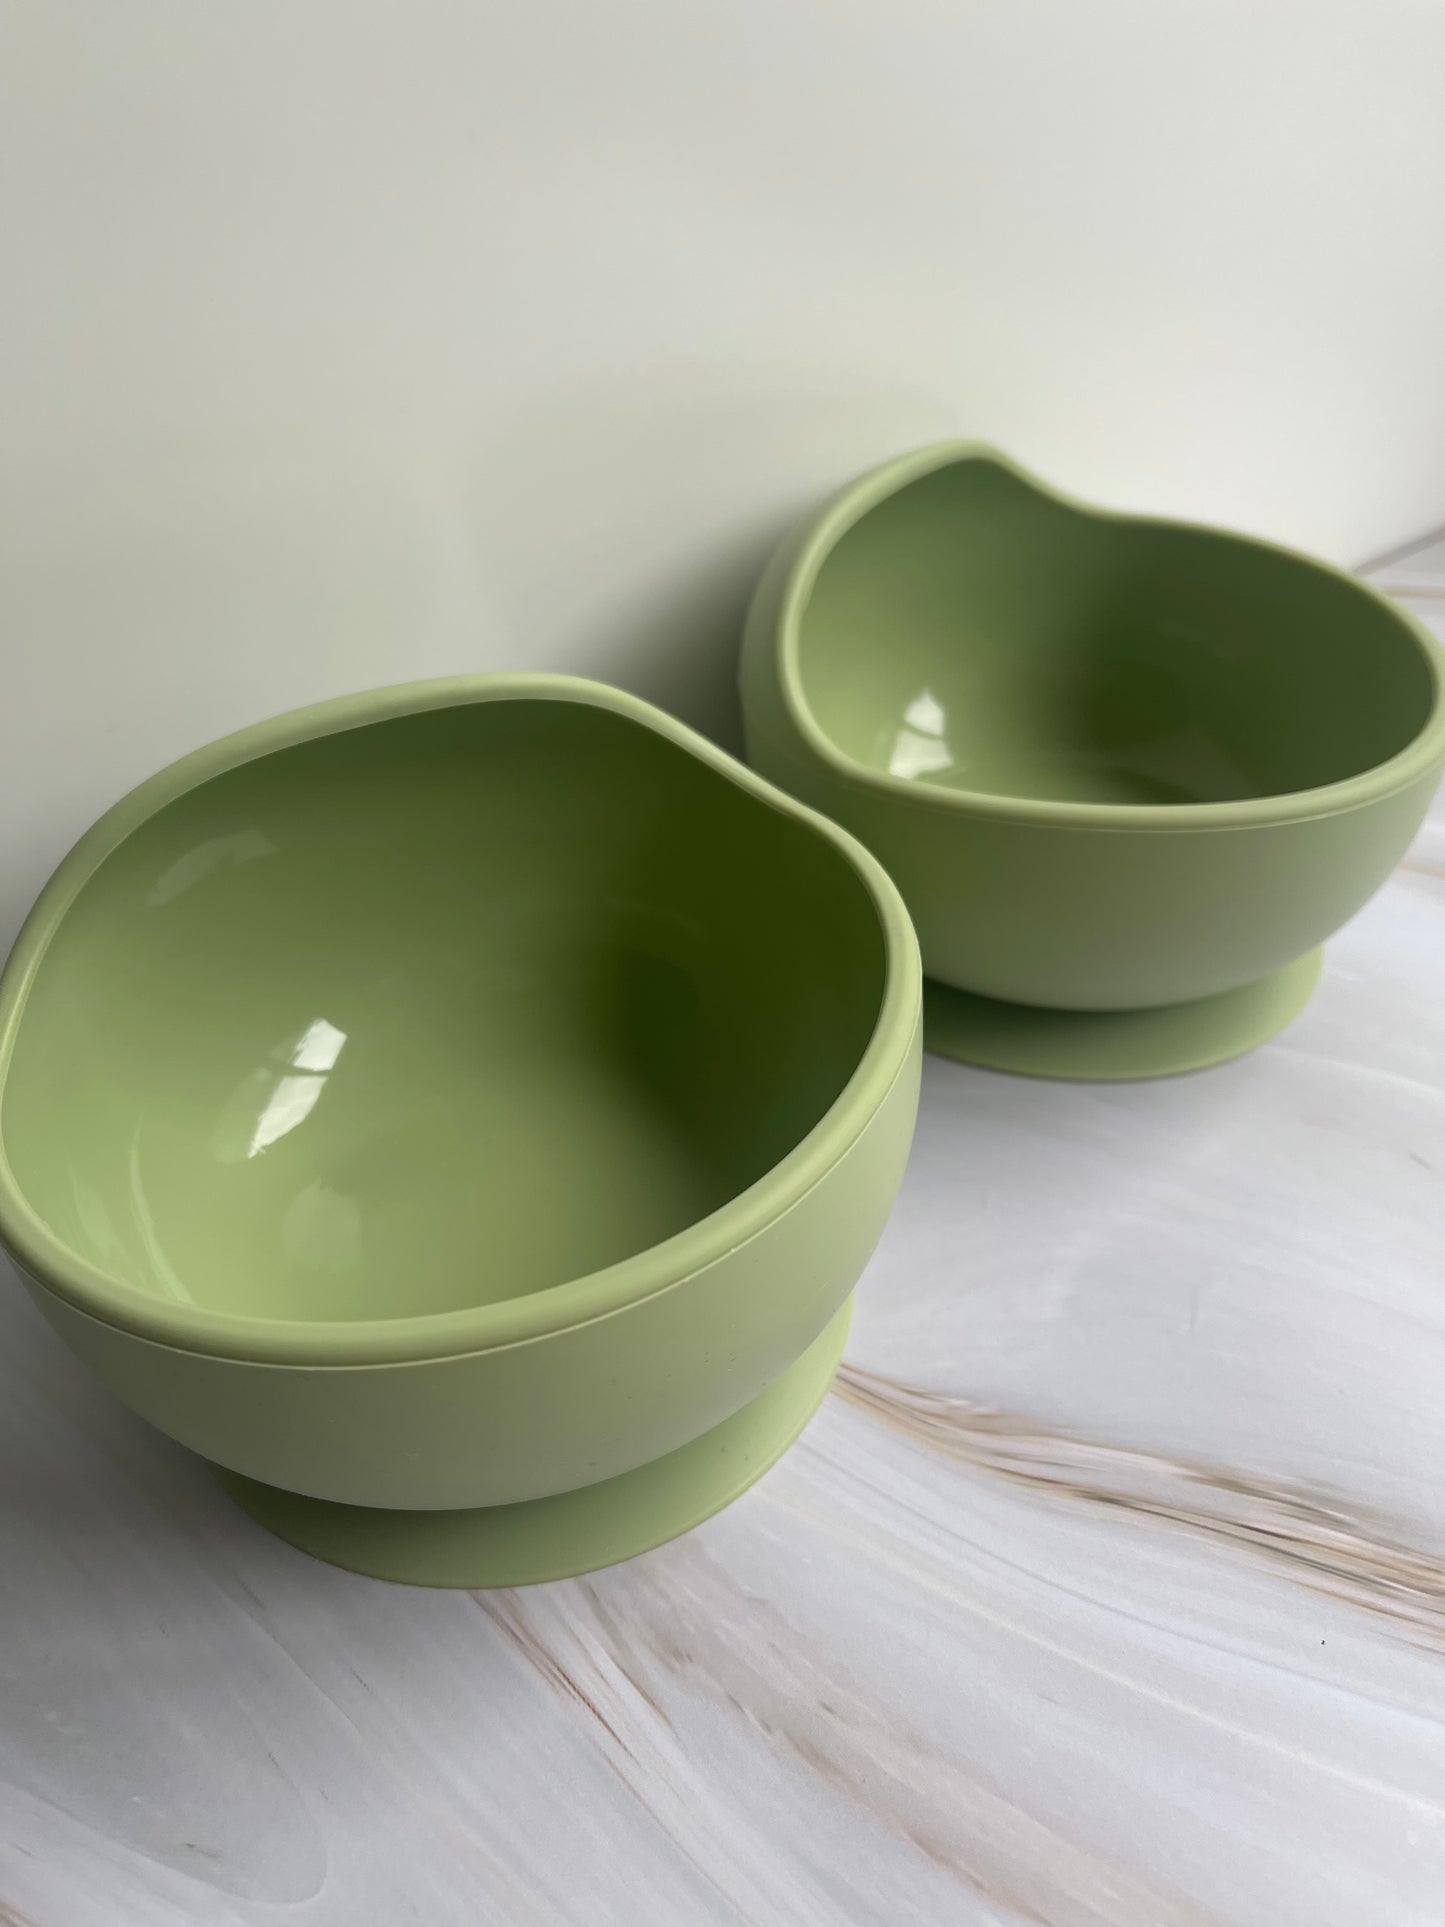 Silicone suction bowls